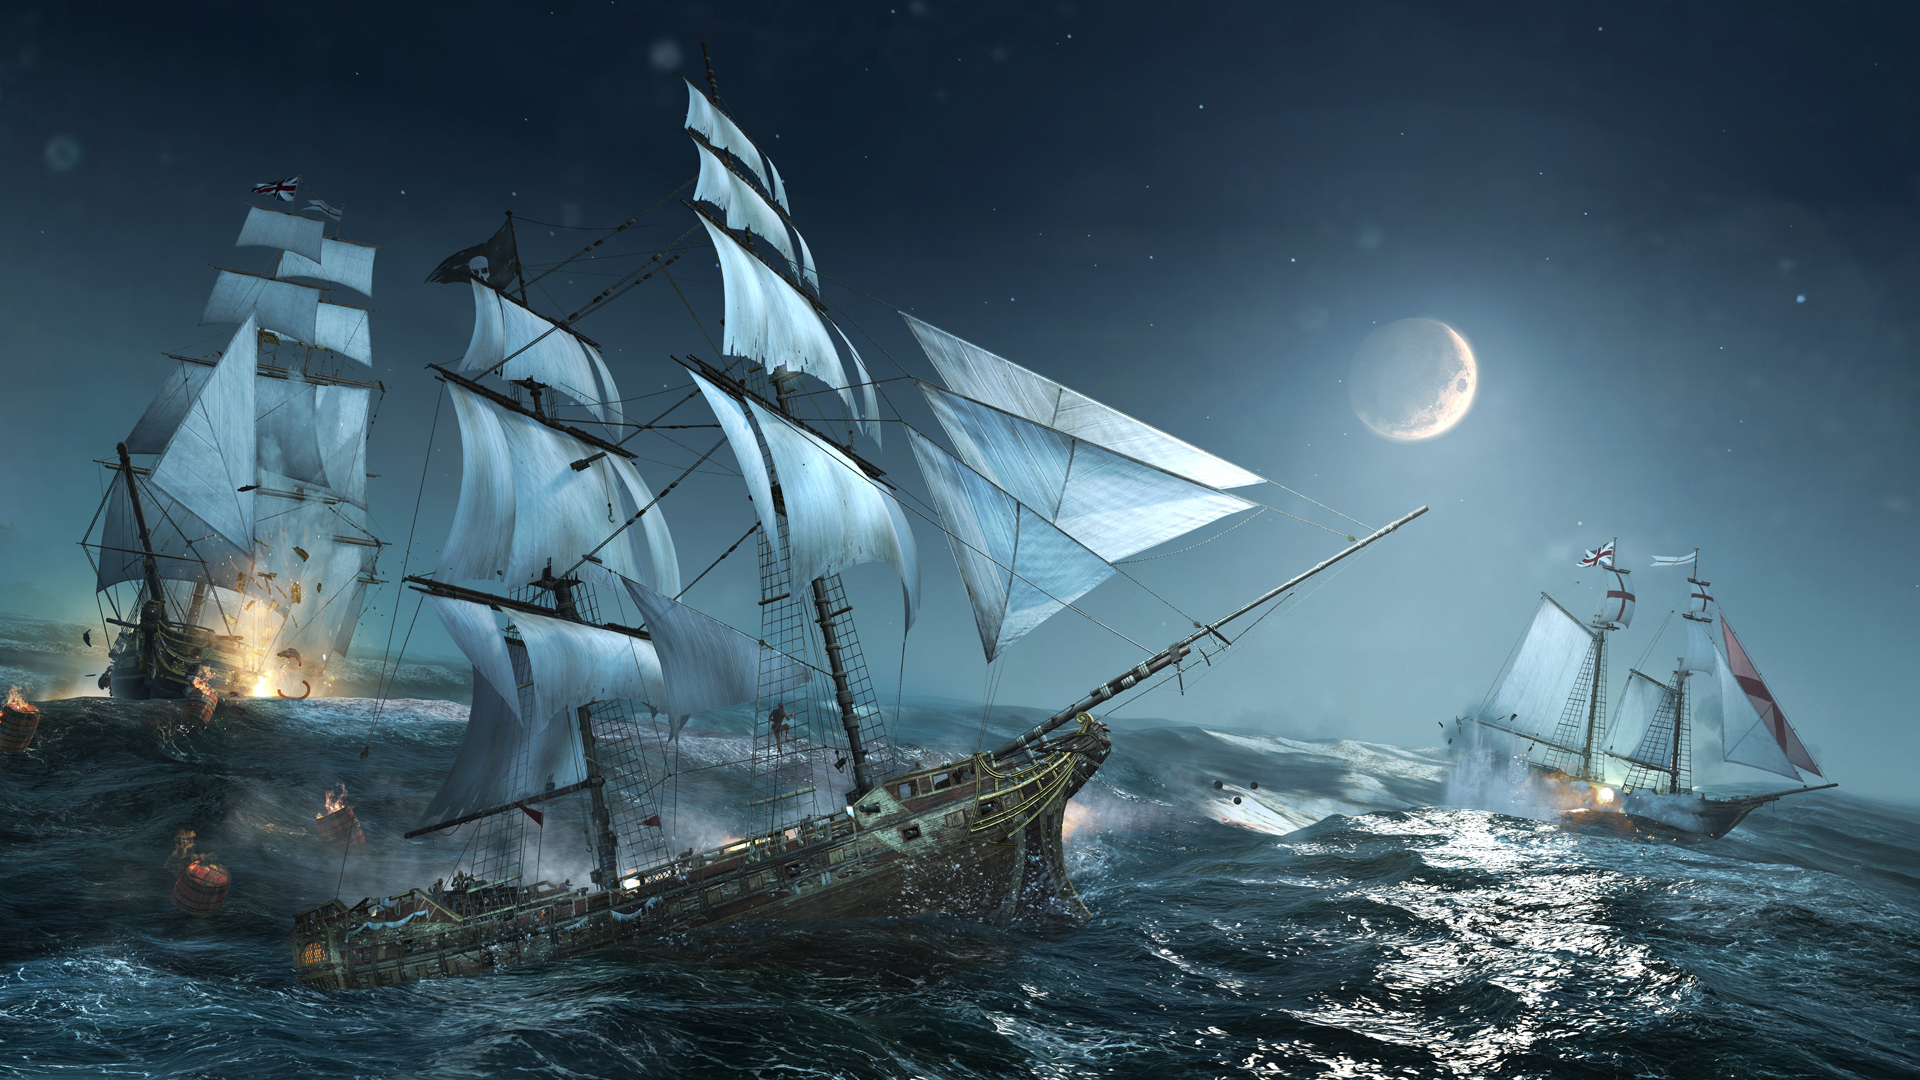 1920x1080 Free download Sea Pirate Wallpapers Best Wallpapers [] for your Desktop, Mobile \u0026 Tablet | Explore 76+ Piracy Wallpaper | Piracy Wallpaper